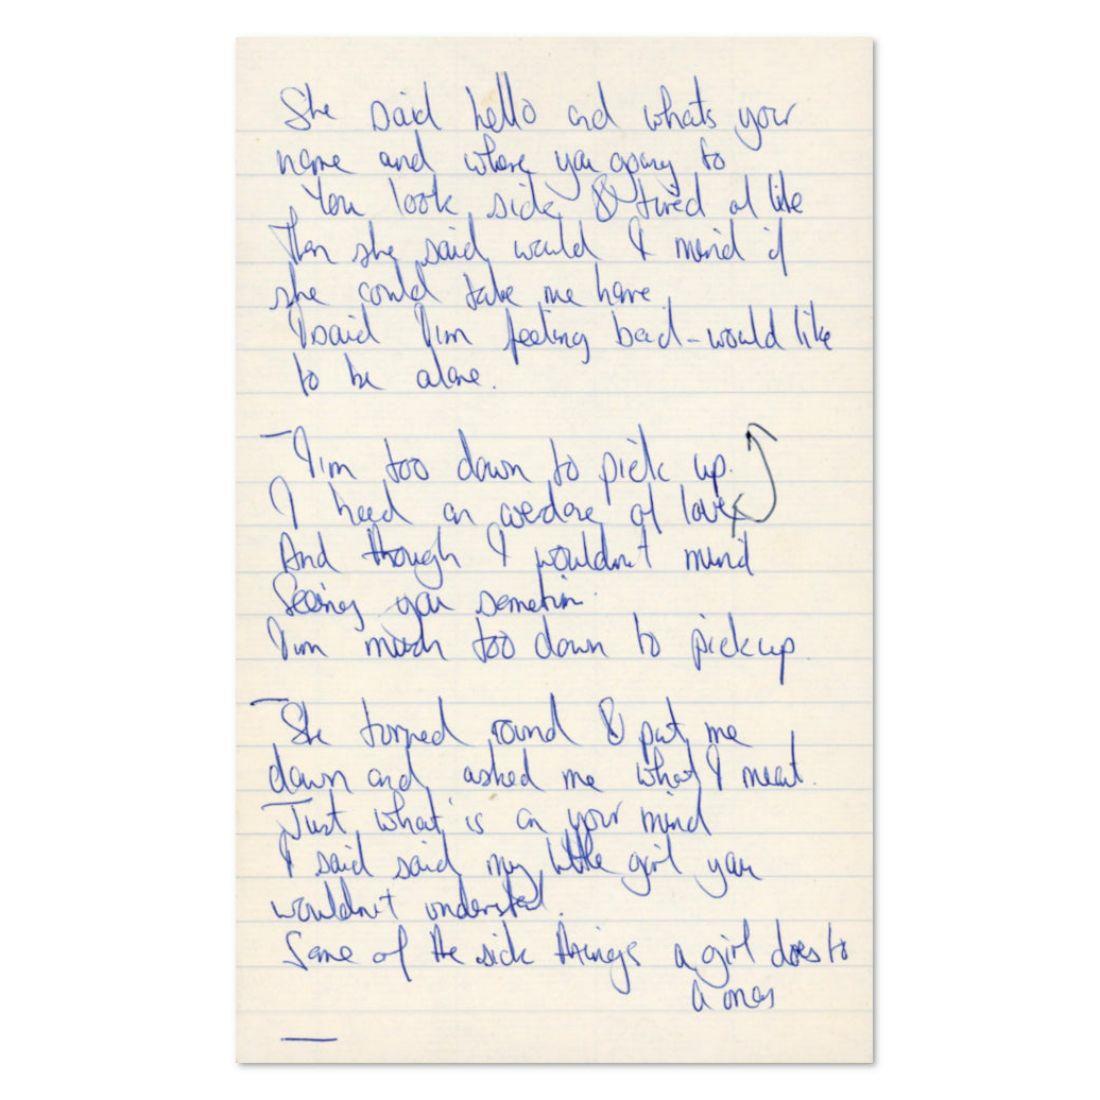 A rare set of Mick Jagger handwritten Rolling Stones lyrics

Written for a previously unknown, unpublished song
Believed to date from a significant period, circa 1965

A small sheet of lined paper, featuring handwritten lyrics by Mick Jagger on both